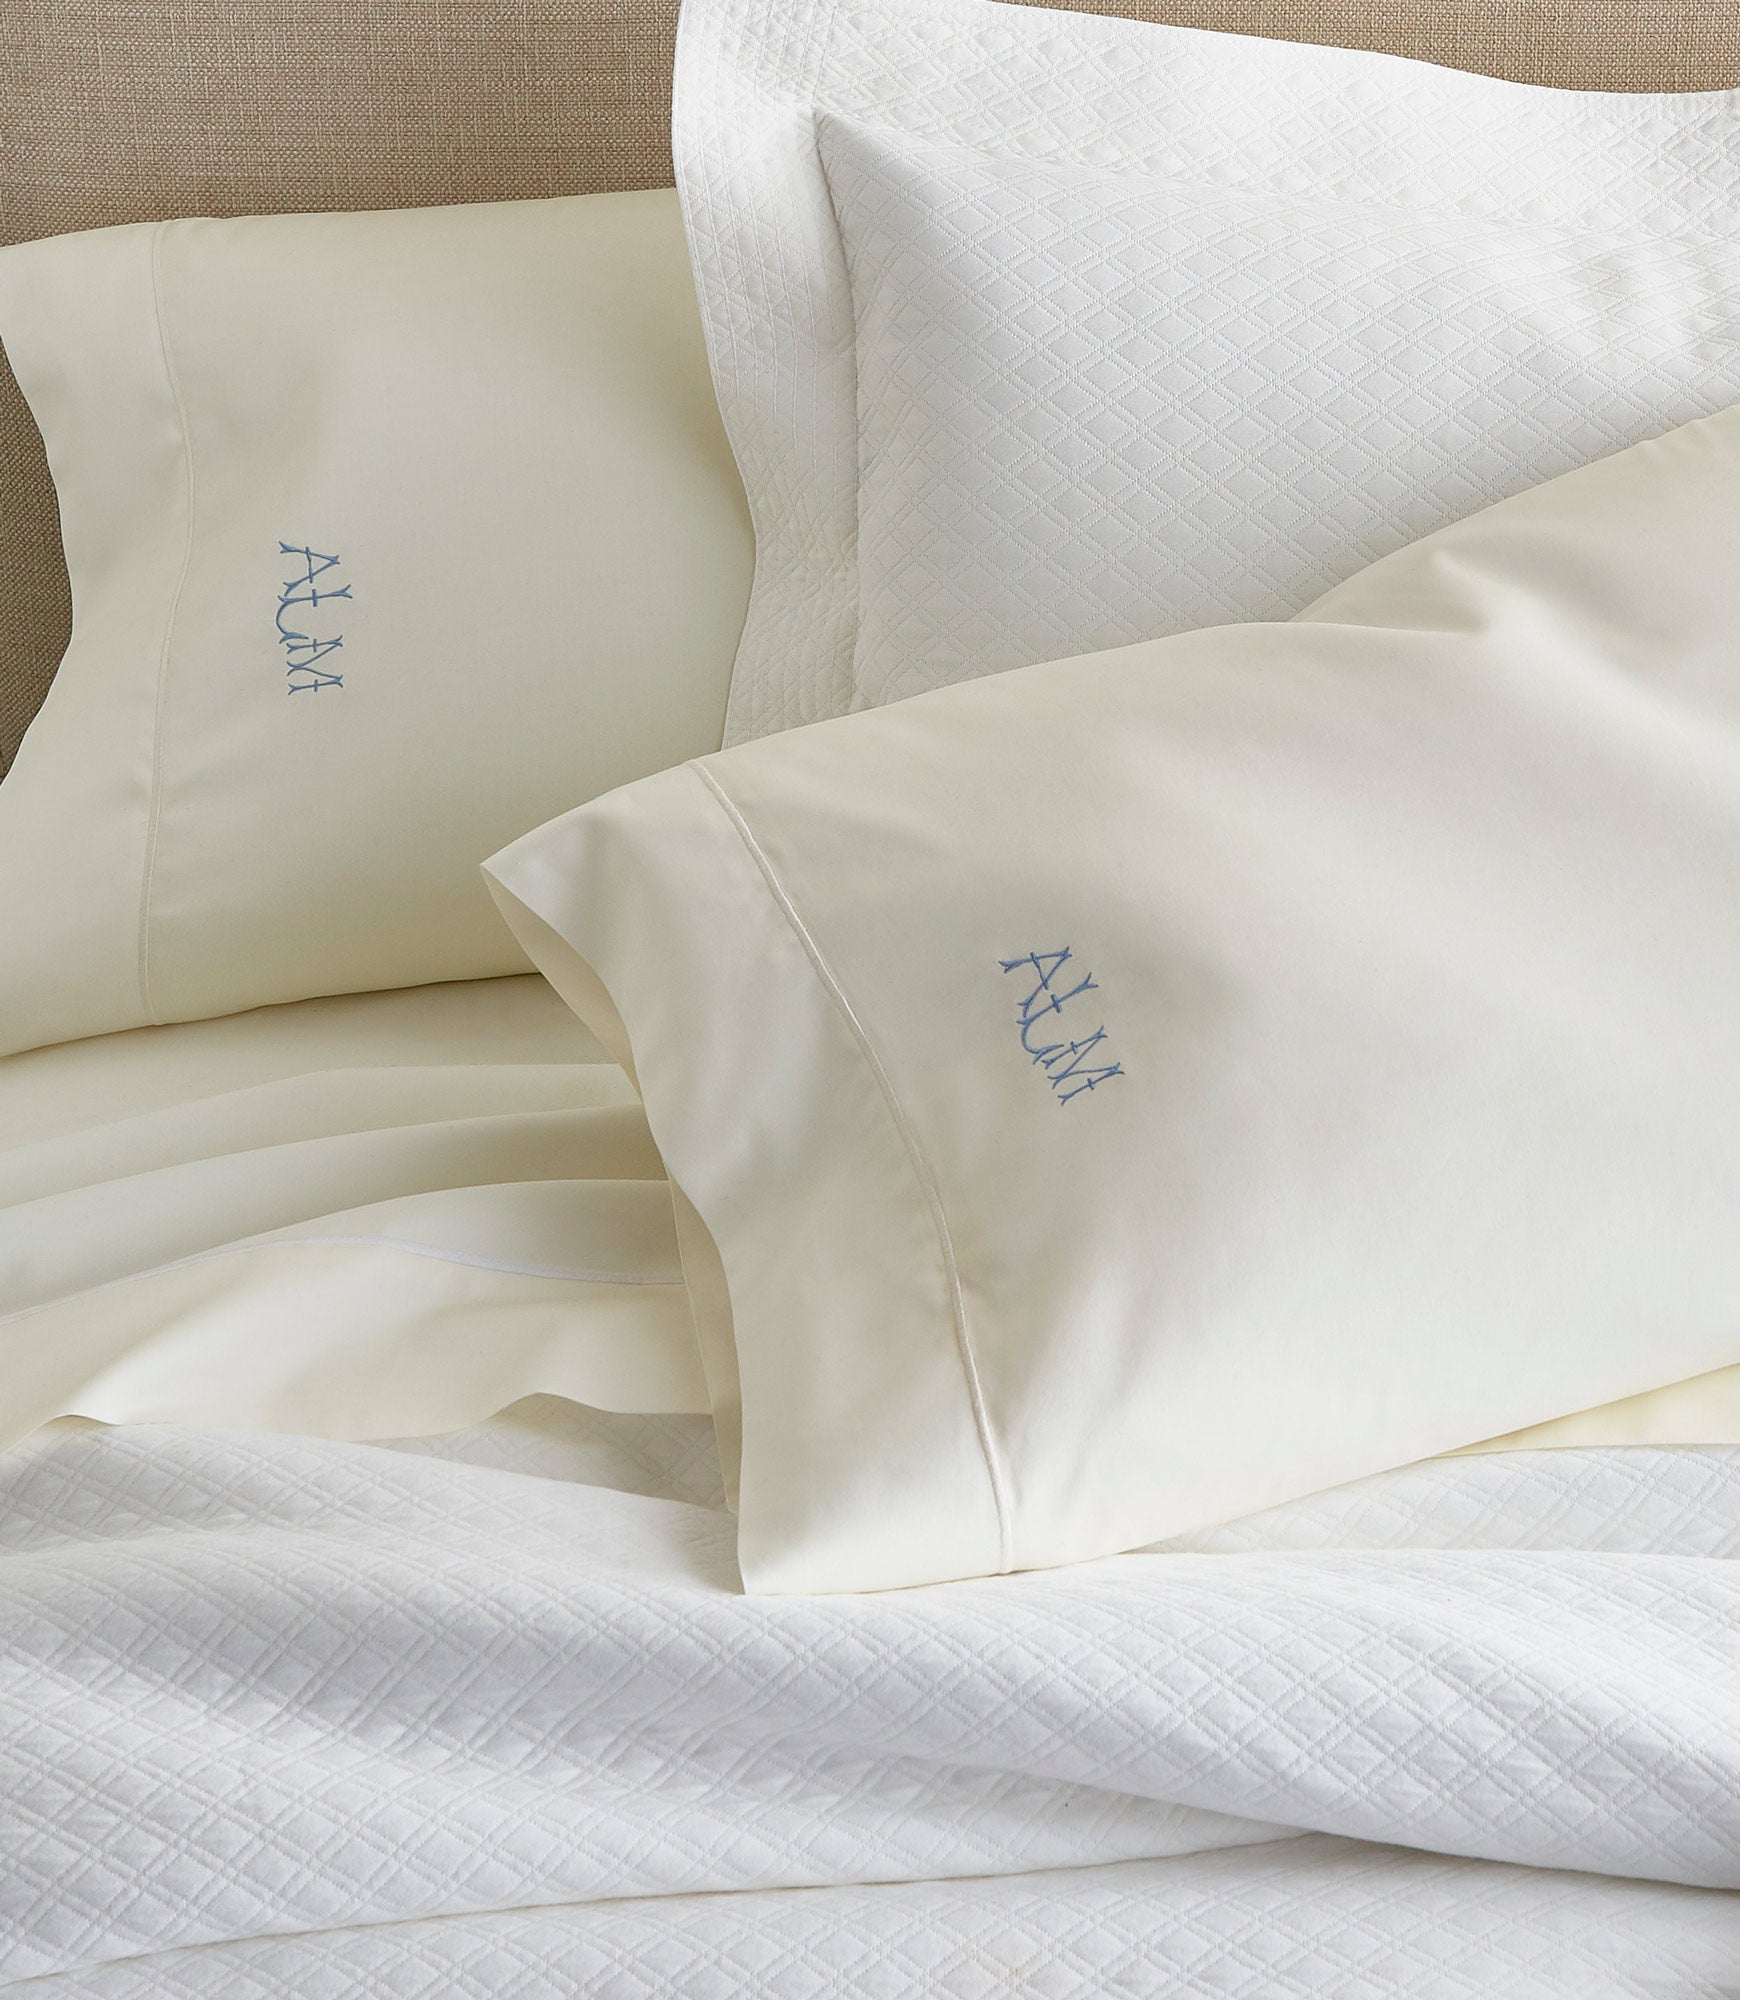 Soprano Sateen Flat Sheet and Pillowcases in Ivory